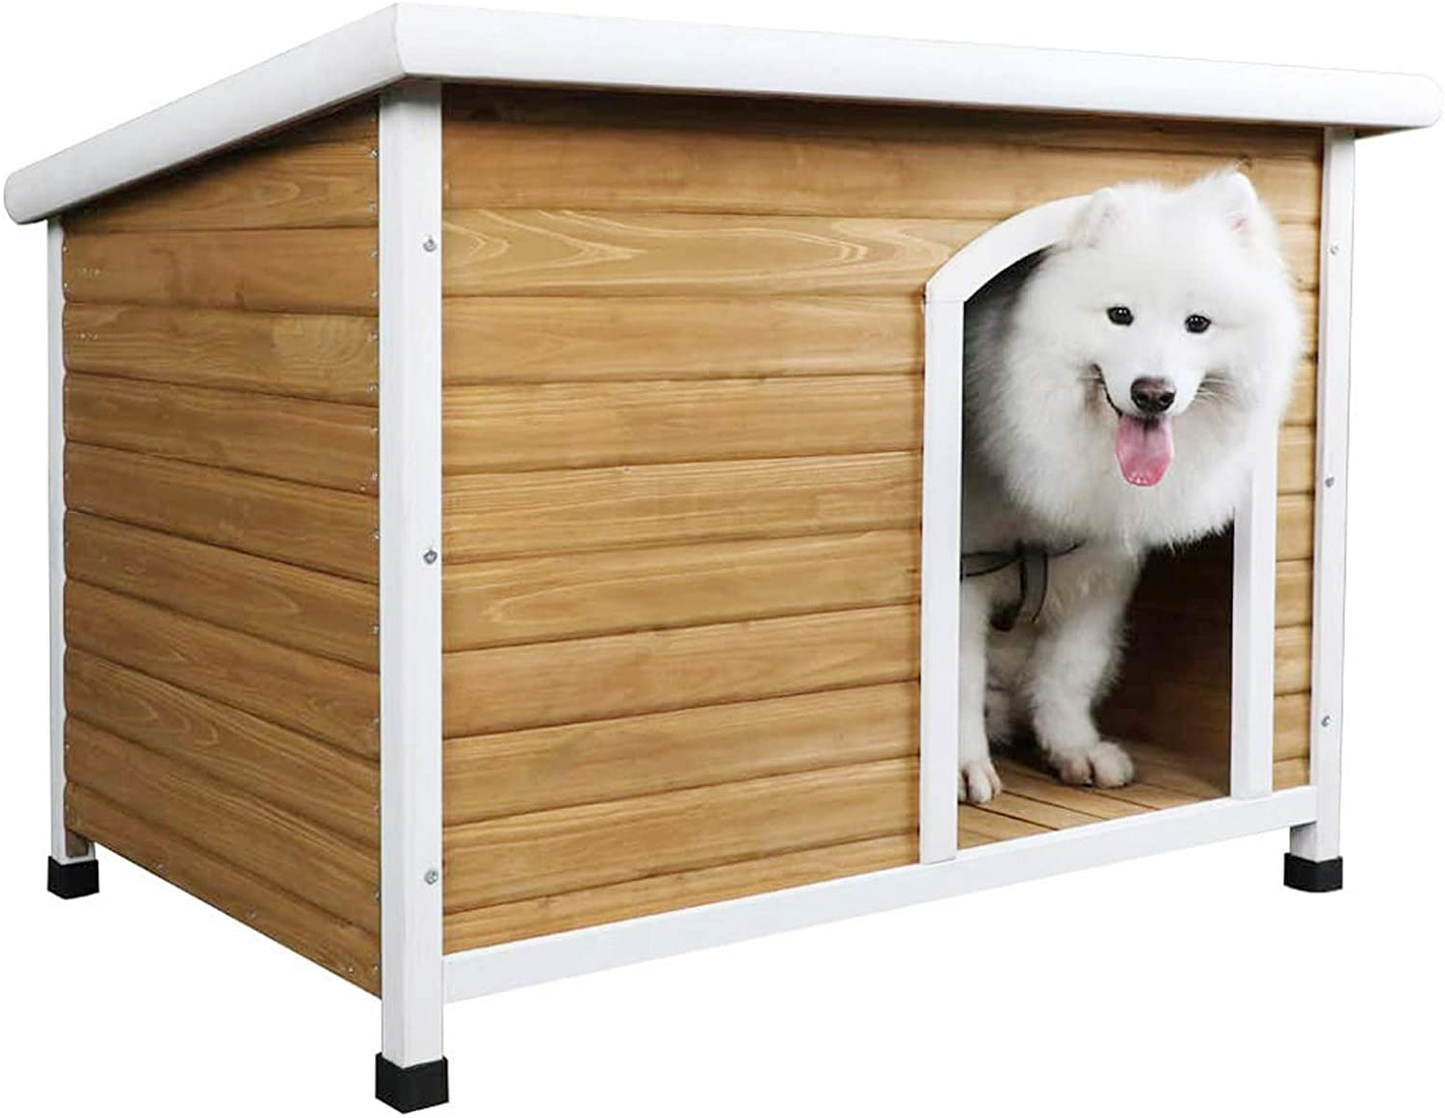 Petsfit Wooden Dog Houses Weatherproof for Small Dog Medium Dog Large Dogs Outdoor Dog Kennel with Raised Feet